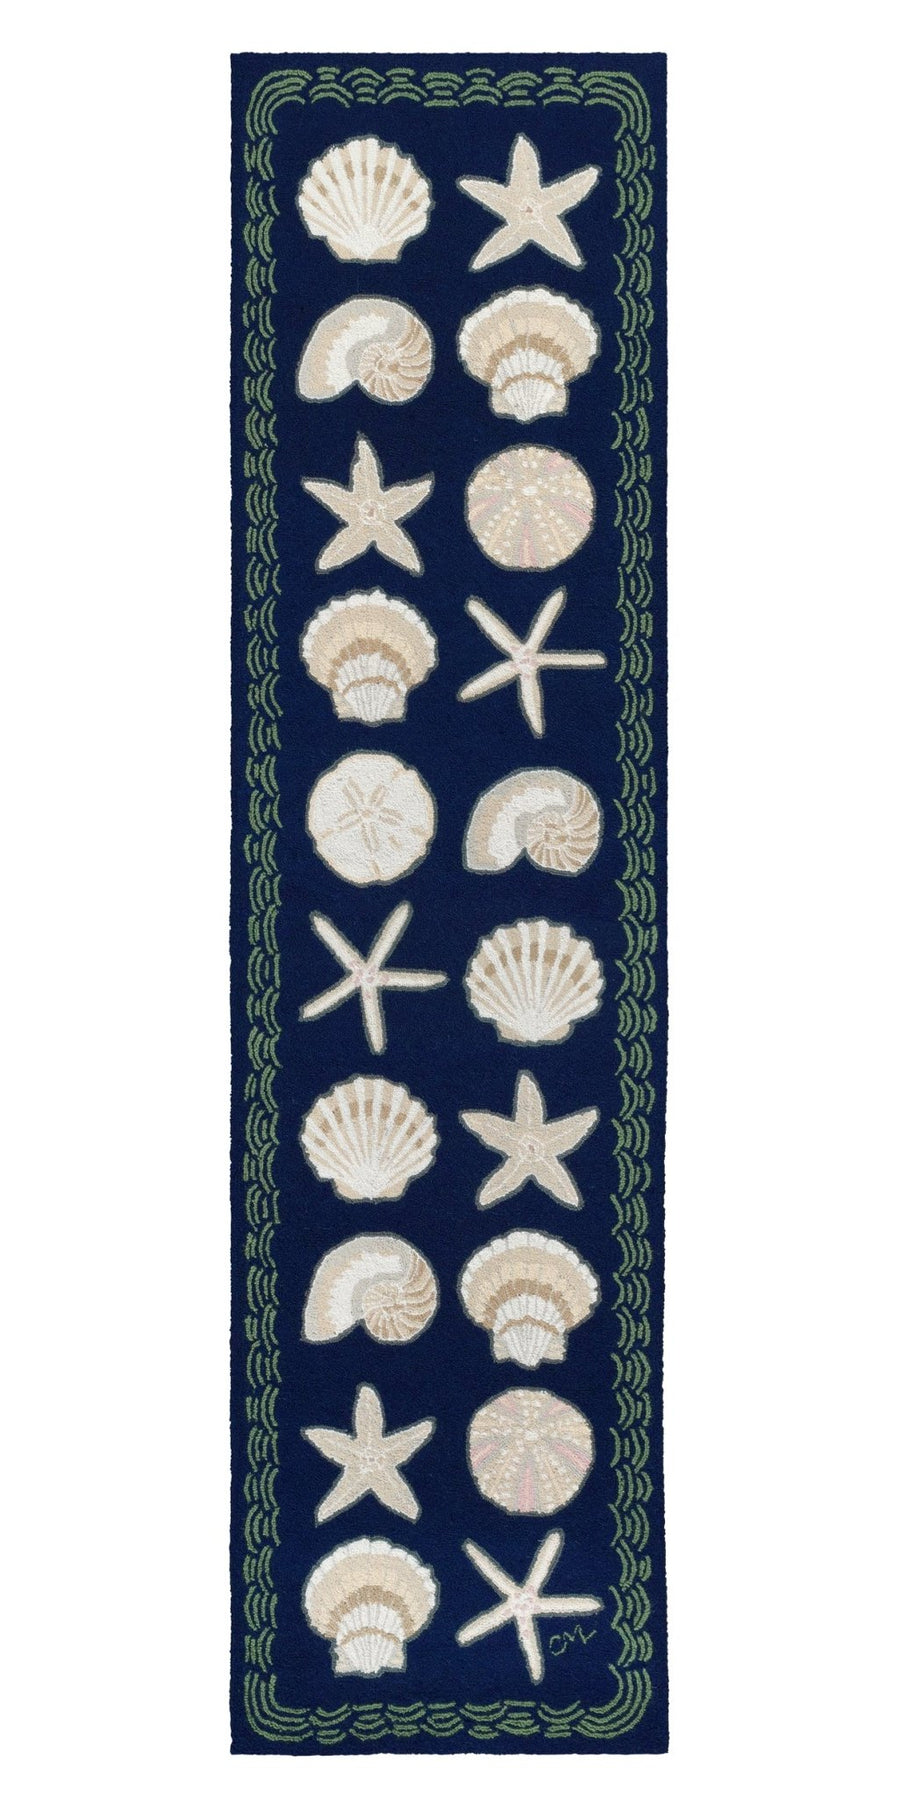 Cape Contemporary Shells with Wave 10' Runner Dark Blue - R1331DKBL